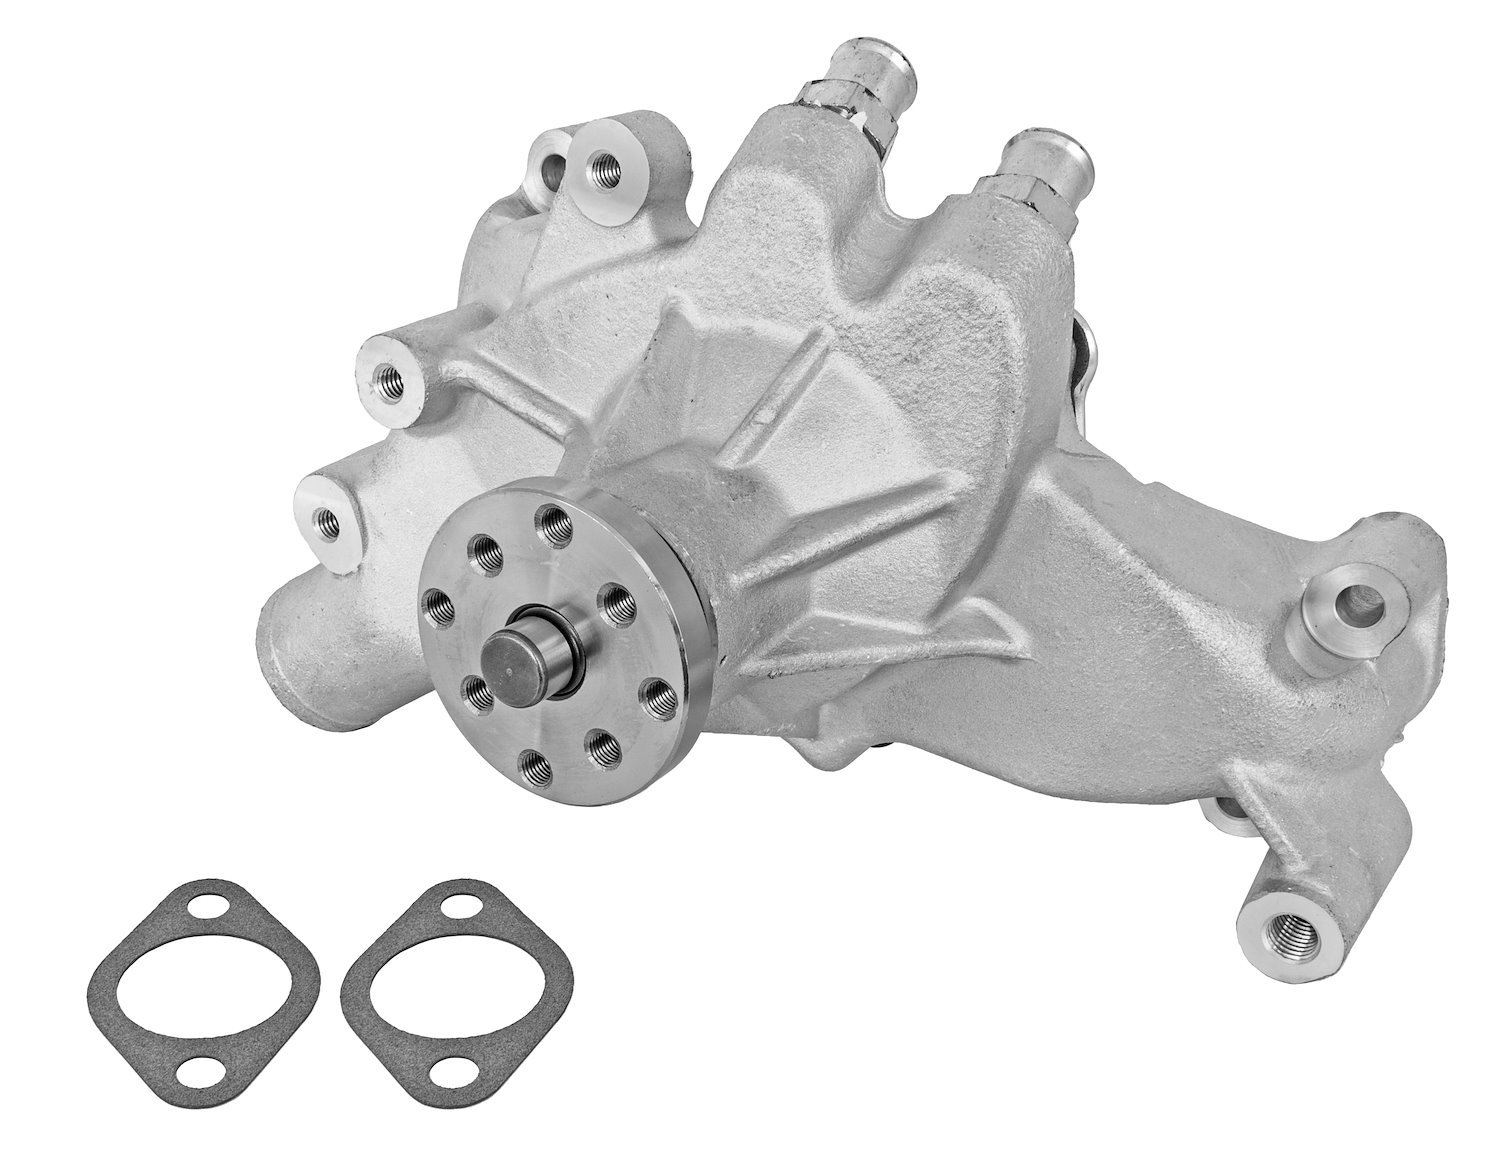 OEM-Style Water Pump for Big Block Chevy [Long, Satin Finish]